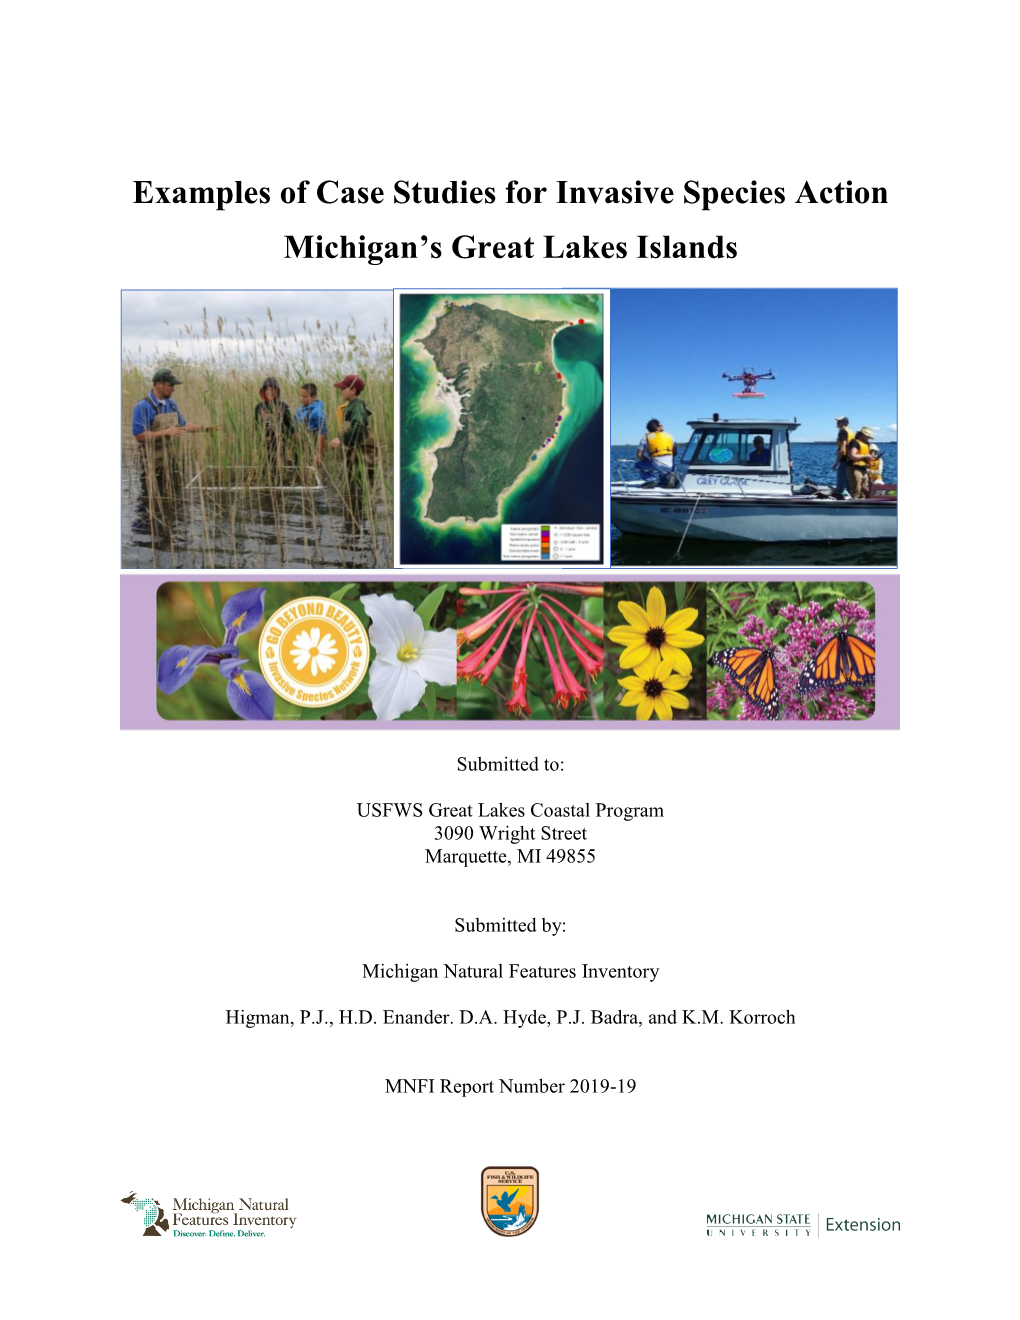 Examples of Case Studies for Invasive Species Action Michigan’S Great Lakes Islands